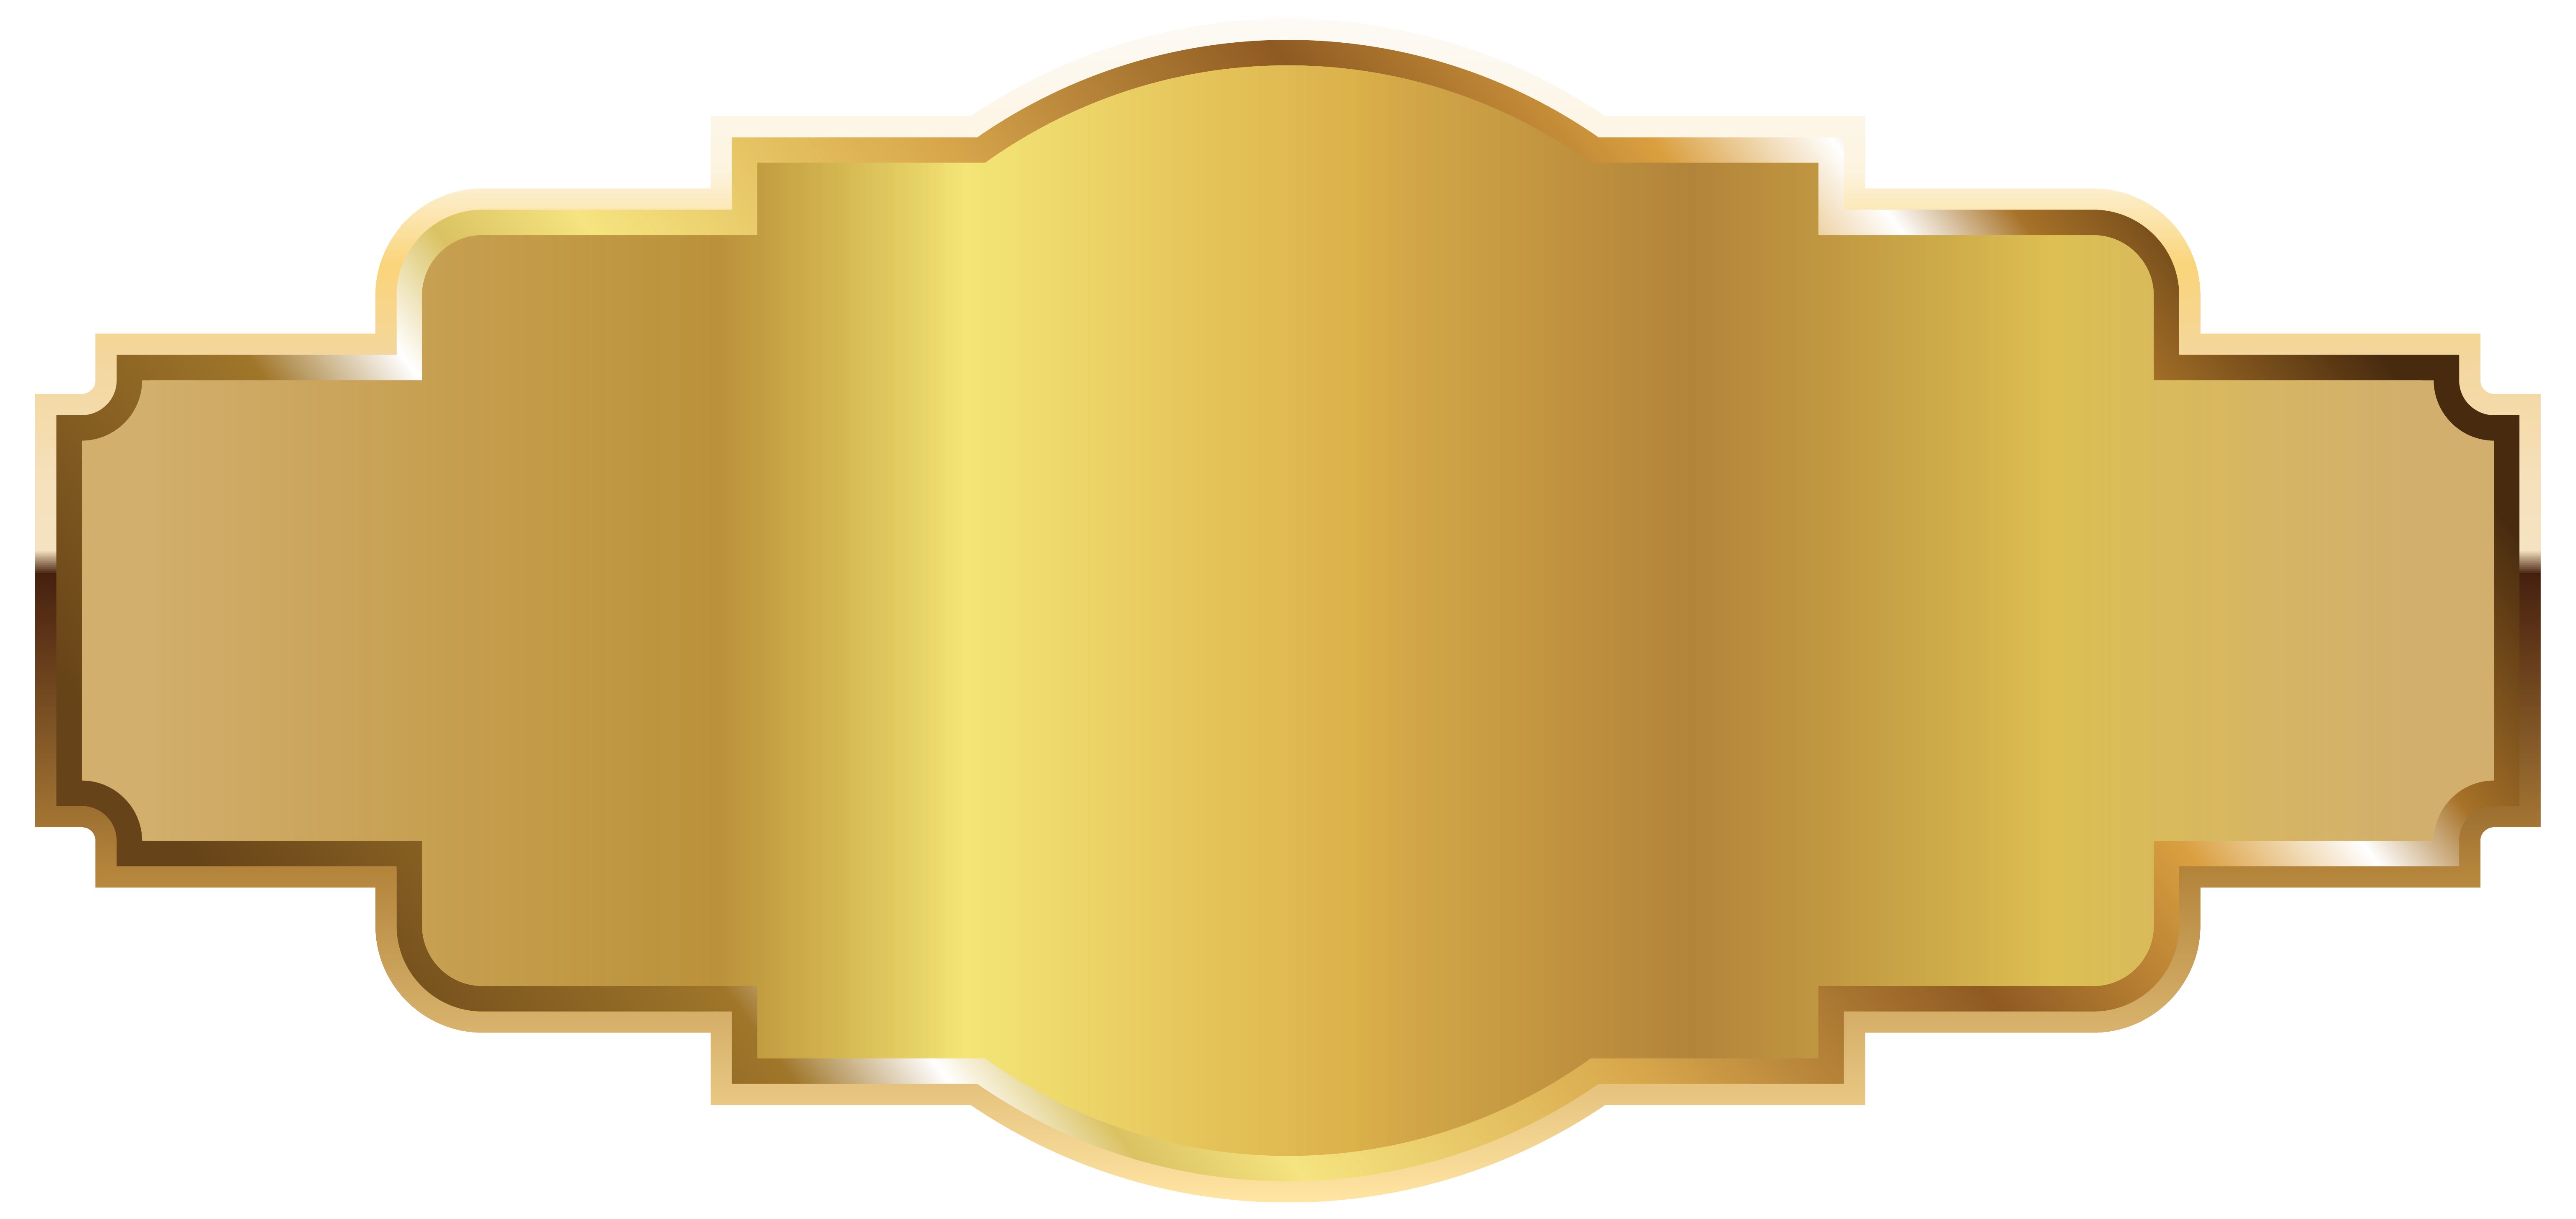 Gold Label Template Png Image Gallery Yopriceville High Quality Images And Transparent Png Free Clipart